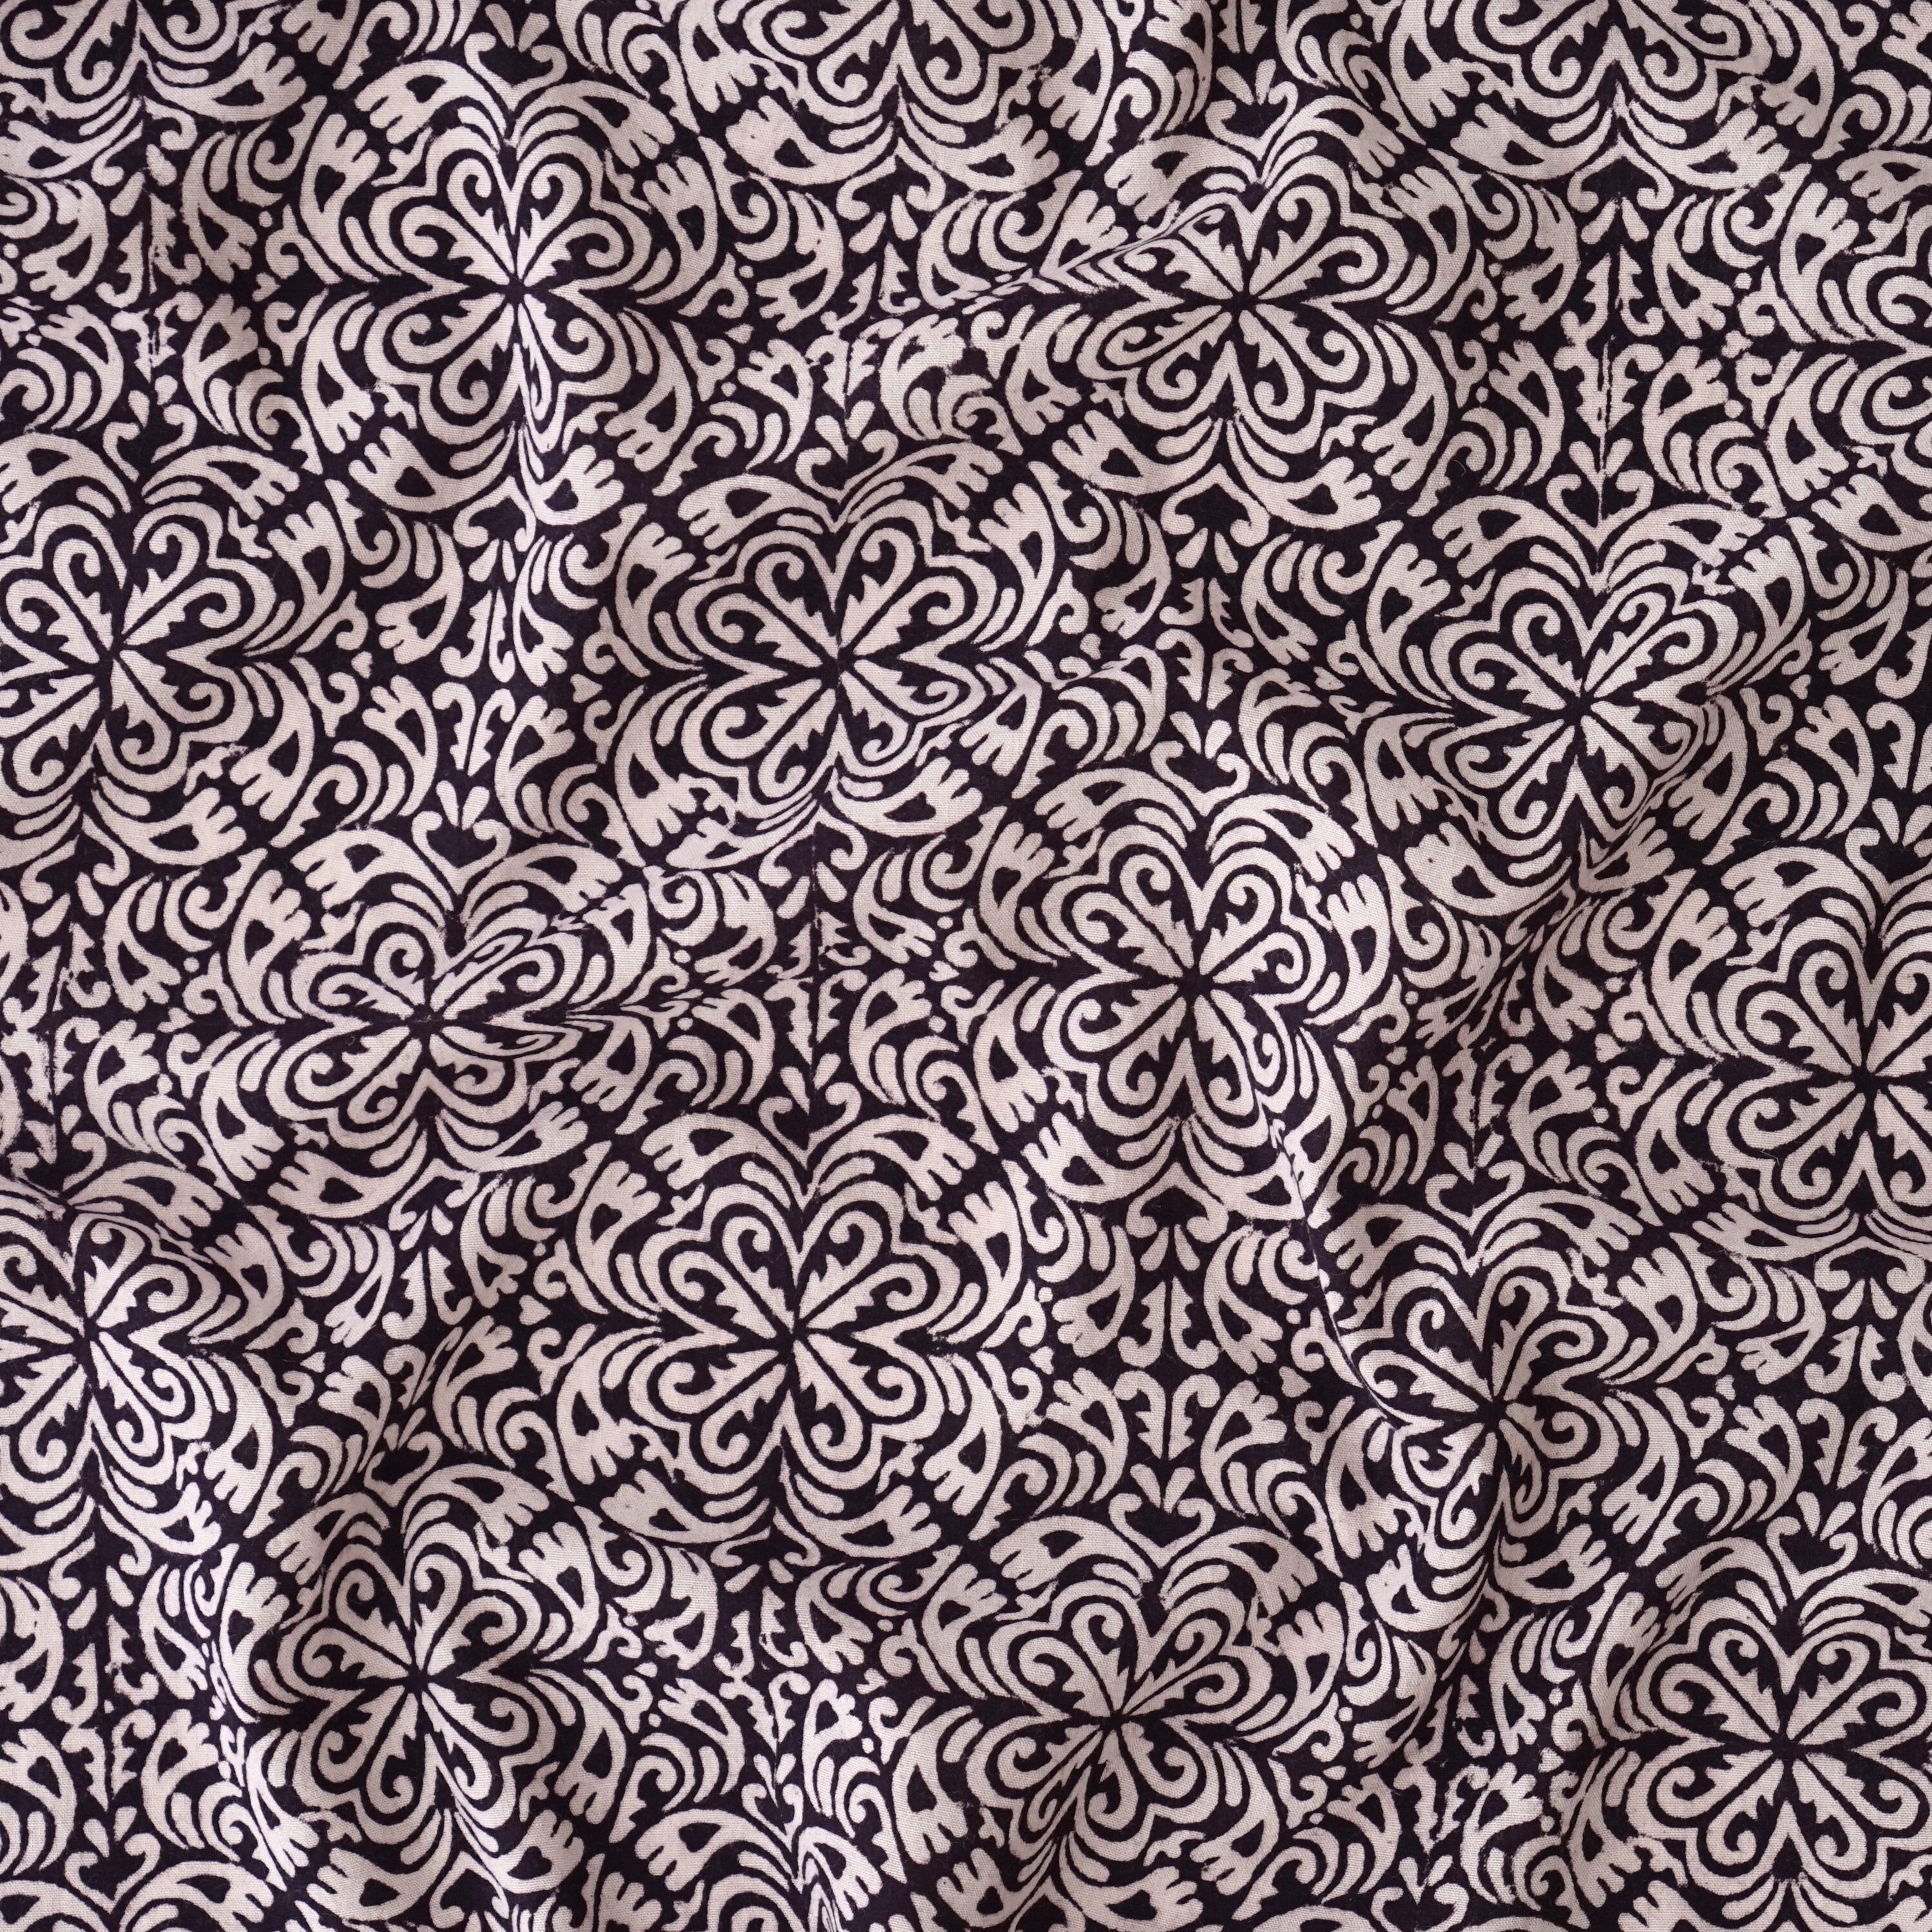 100% Block-Printed Cotton Fabric From India - Bagh Printing Method - Psychadelia Design - Contrast